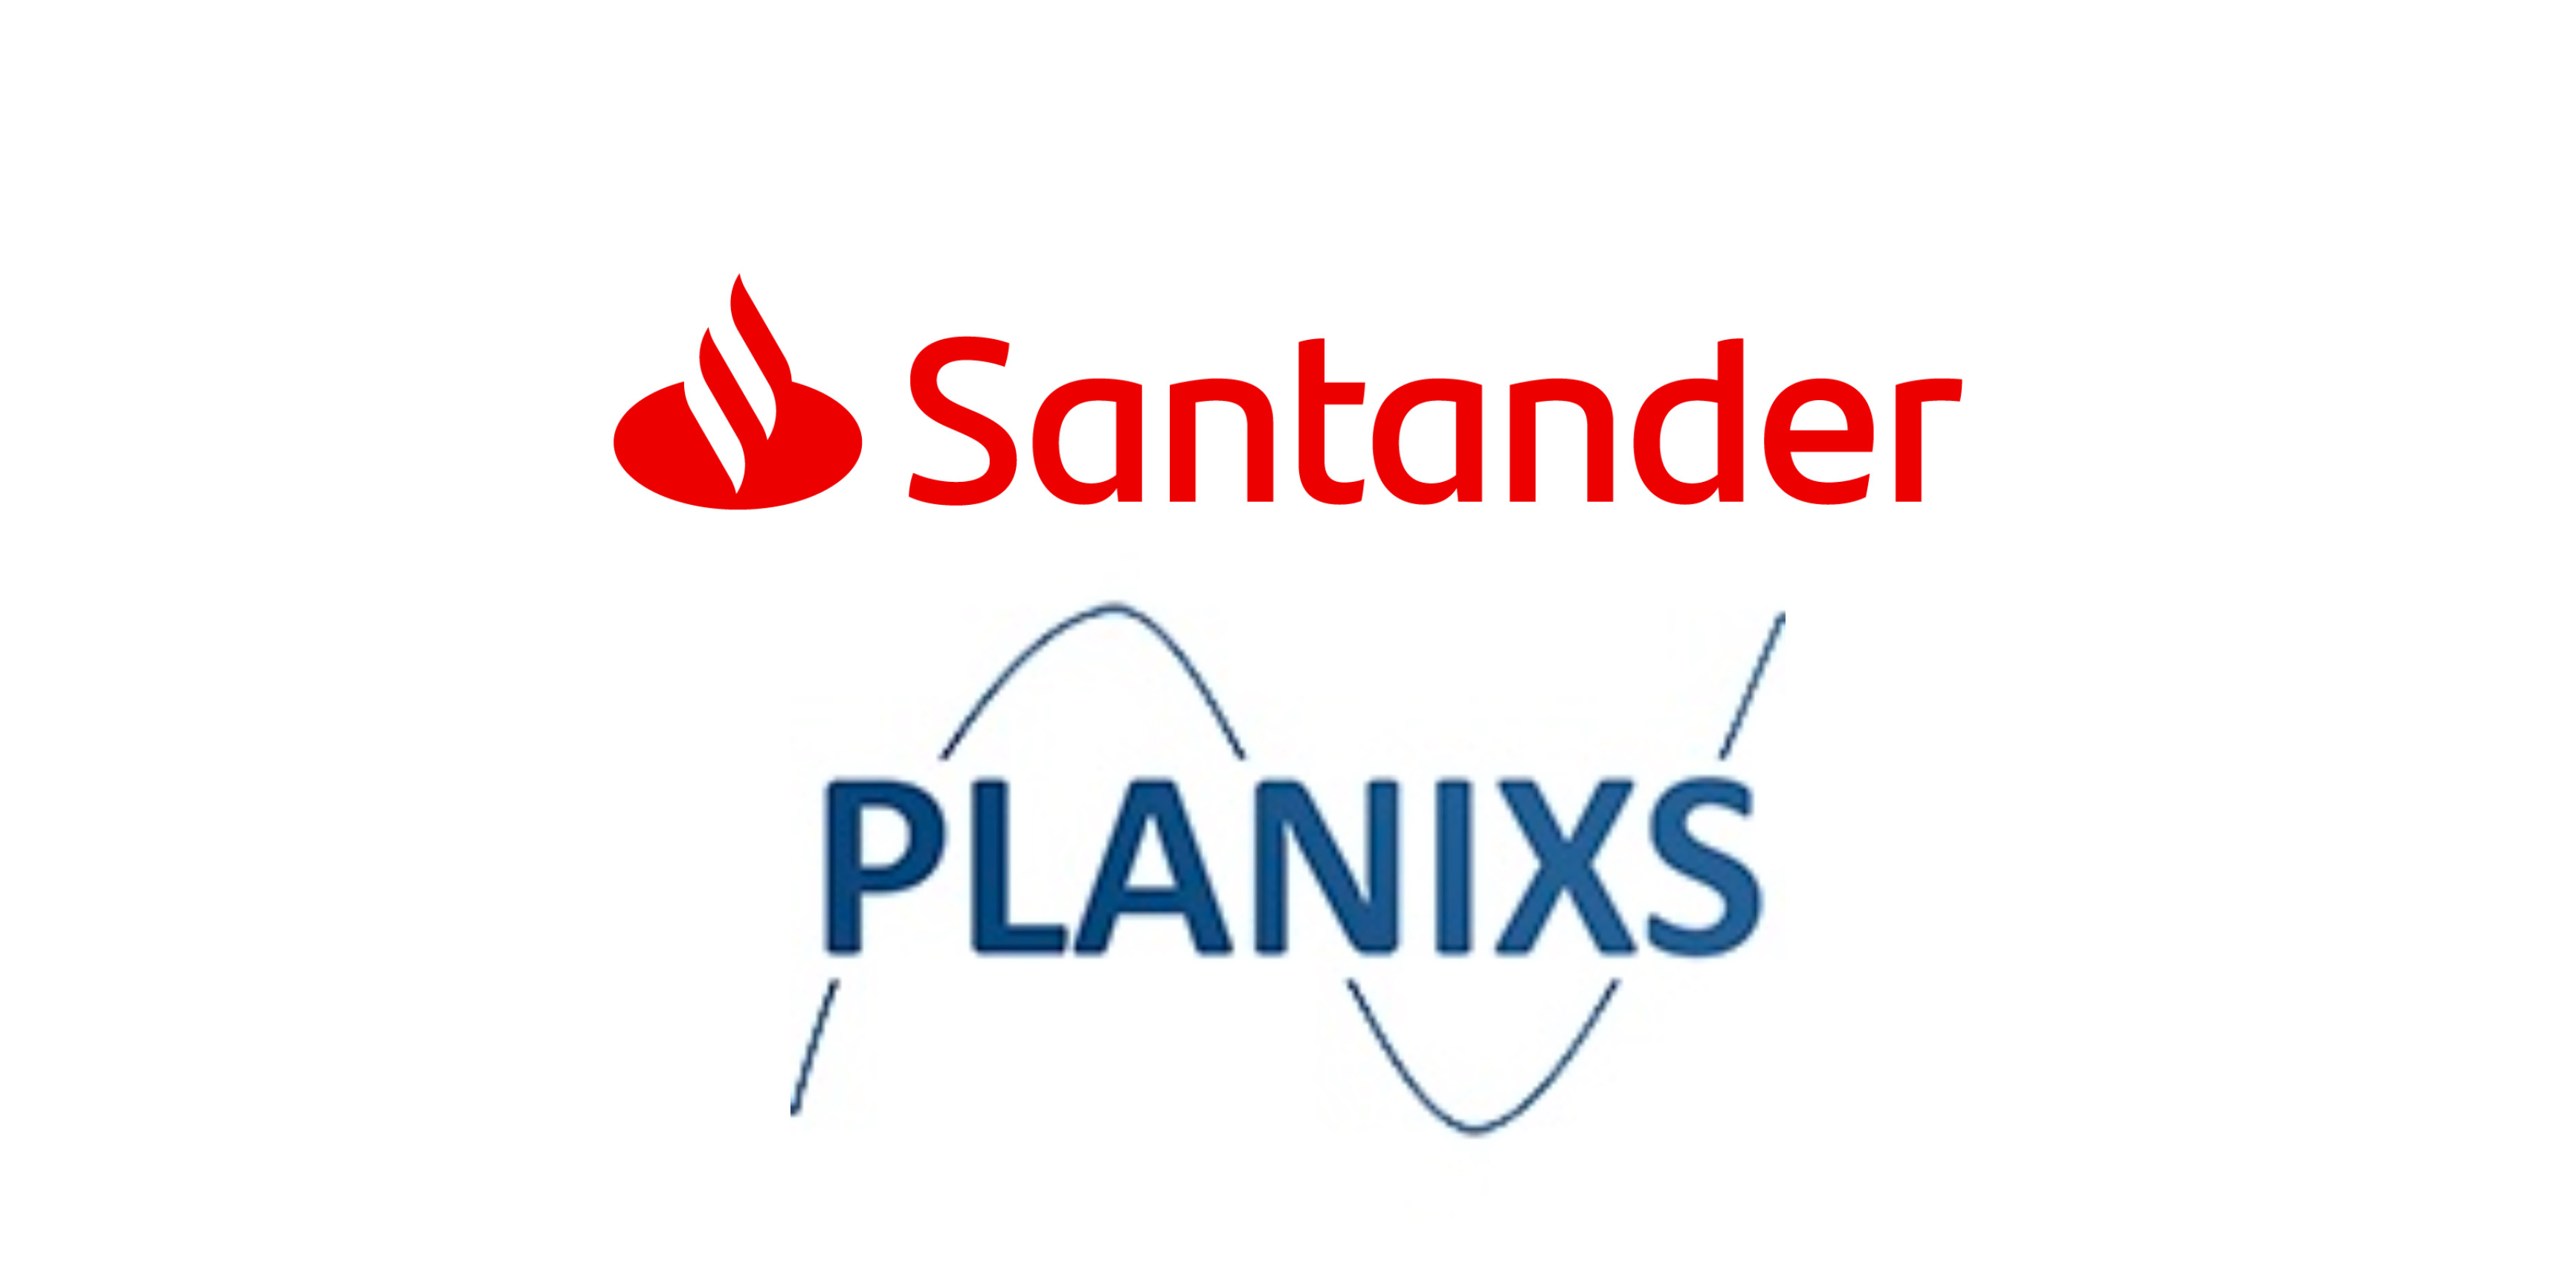 Santander Selects Planixs’ Real-Time Treasury Software to Enhance Liquidity Management Processes and Digitally Transform Treasury Operations